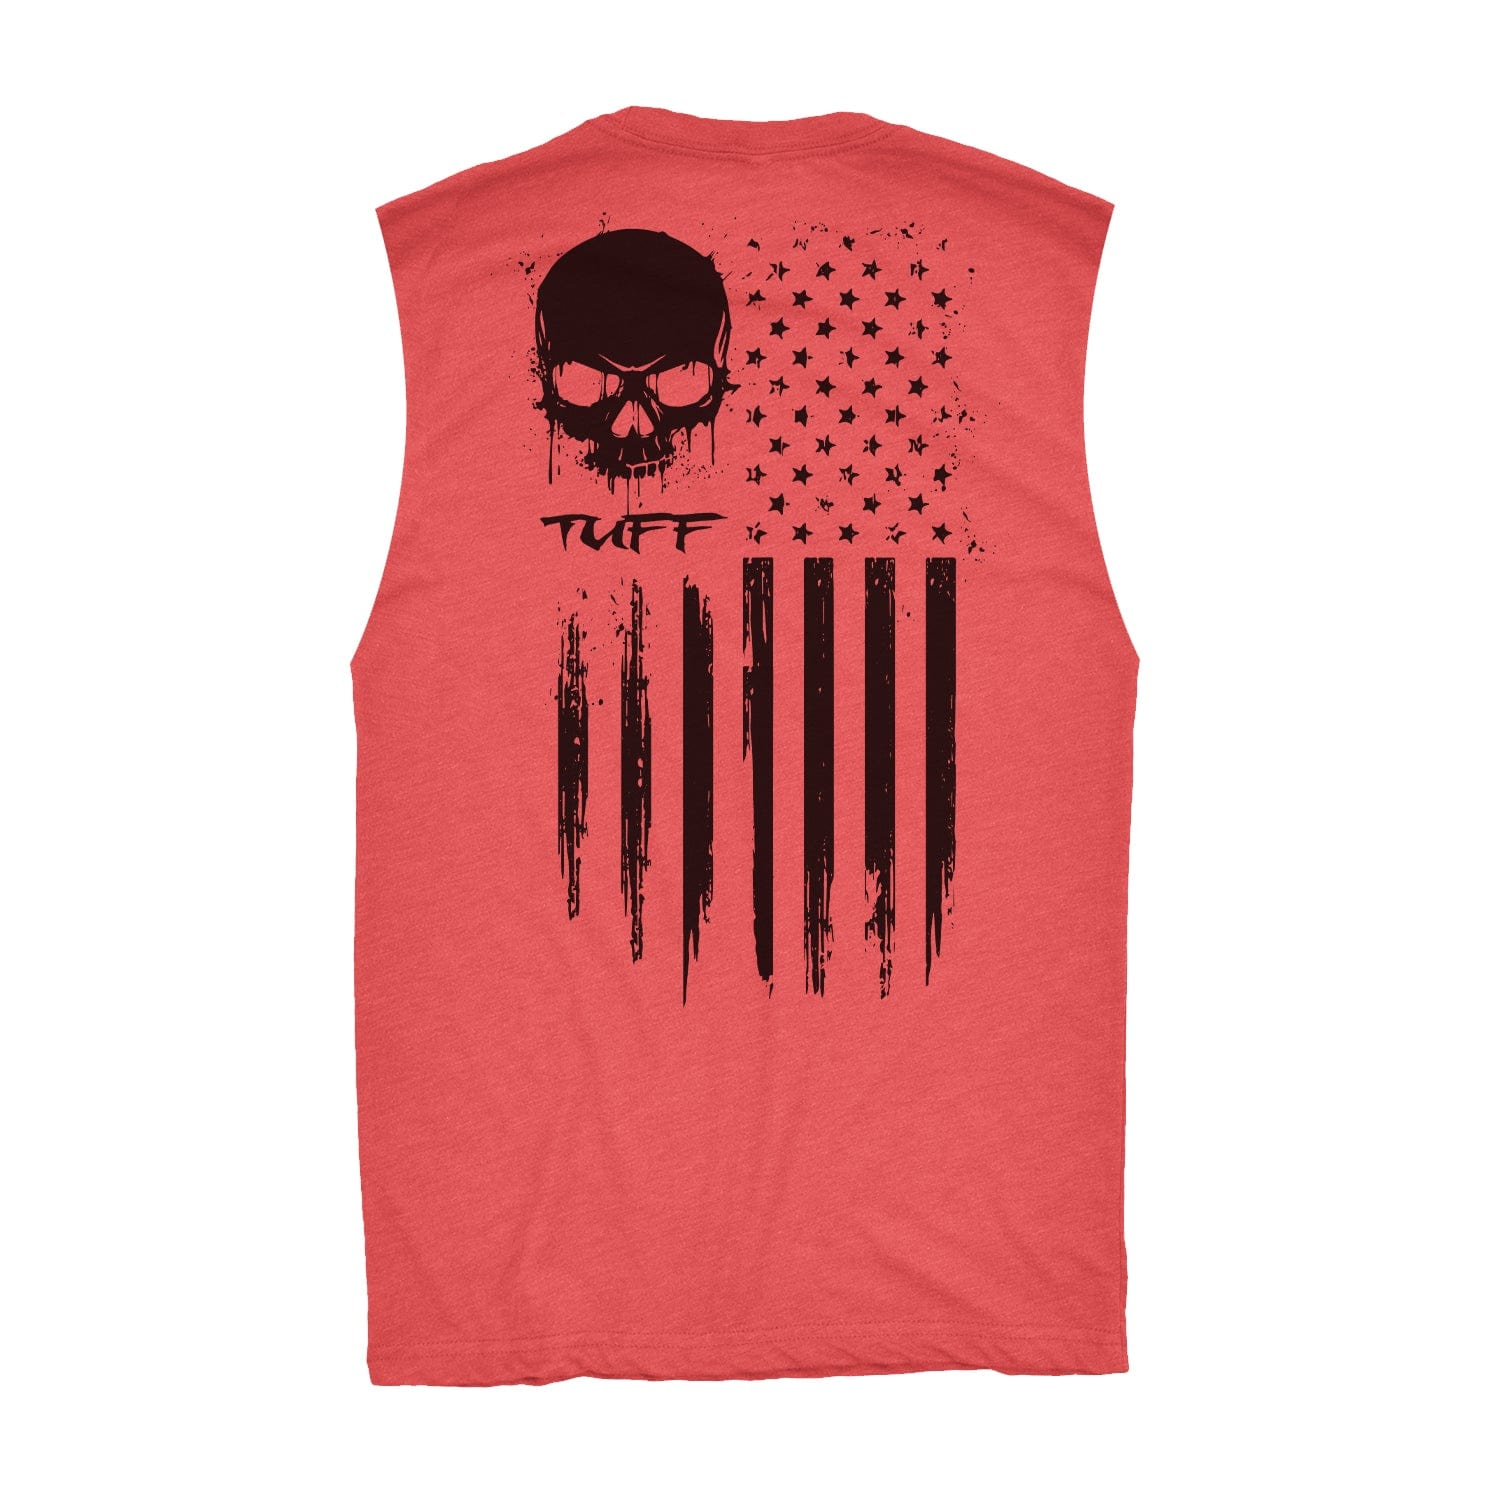 The "No Surrender" Raw Edge Muscle Tank Men's Tank Tops